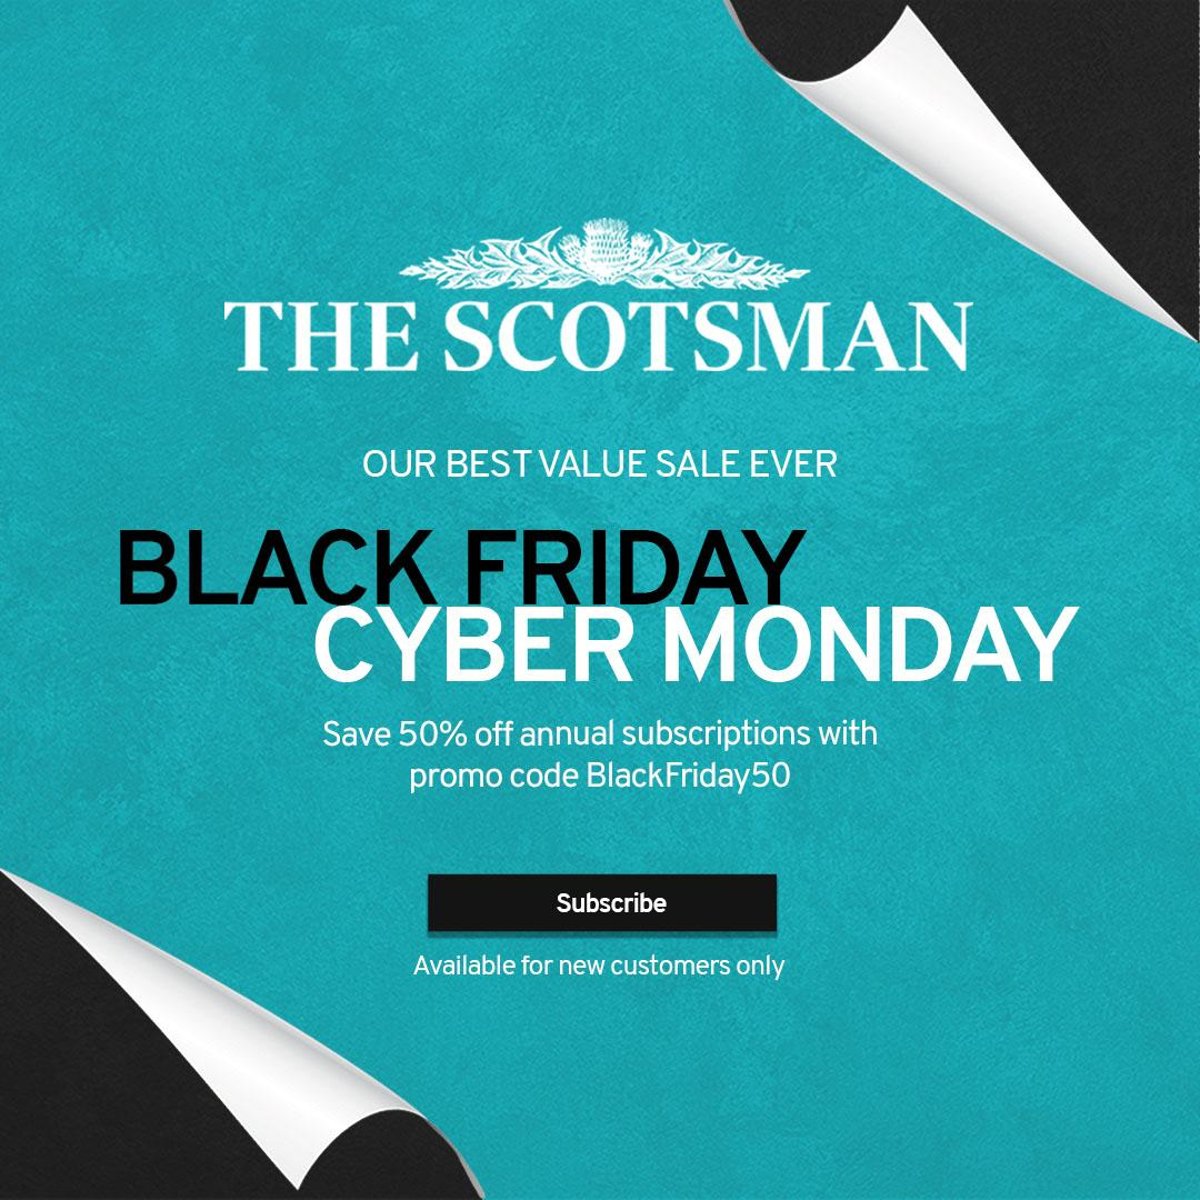 In our biggest sale of the YEAR, The Scotsman is offering 50% off annual digital subscription for Black Friday